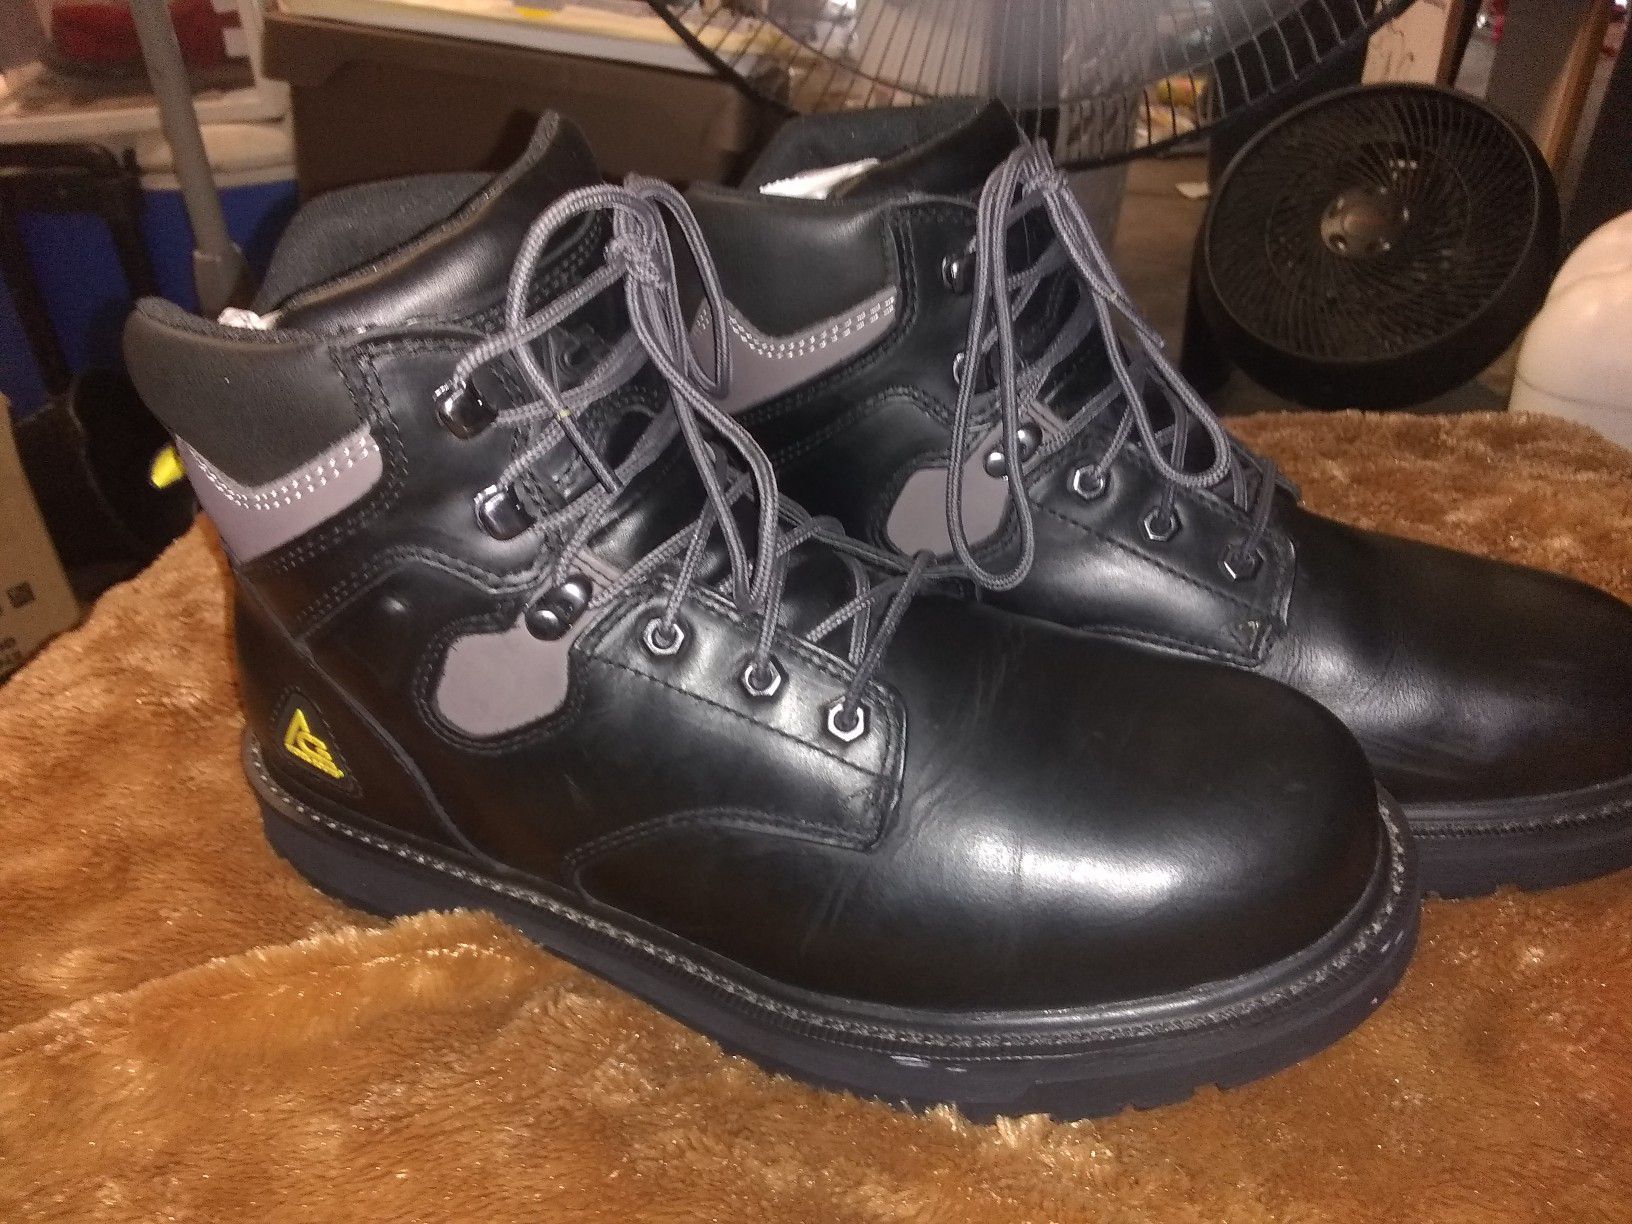 Brand New Ace work boots size 11 Men